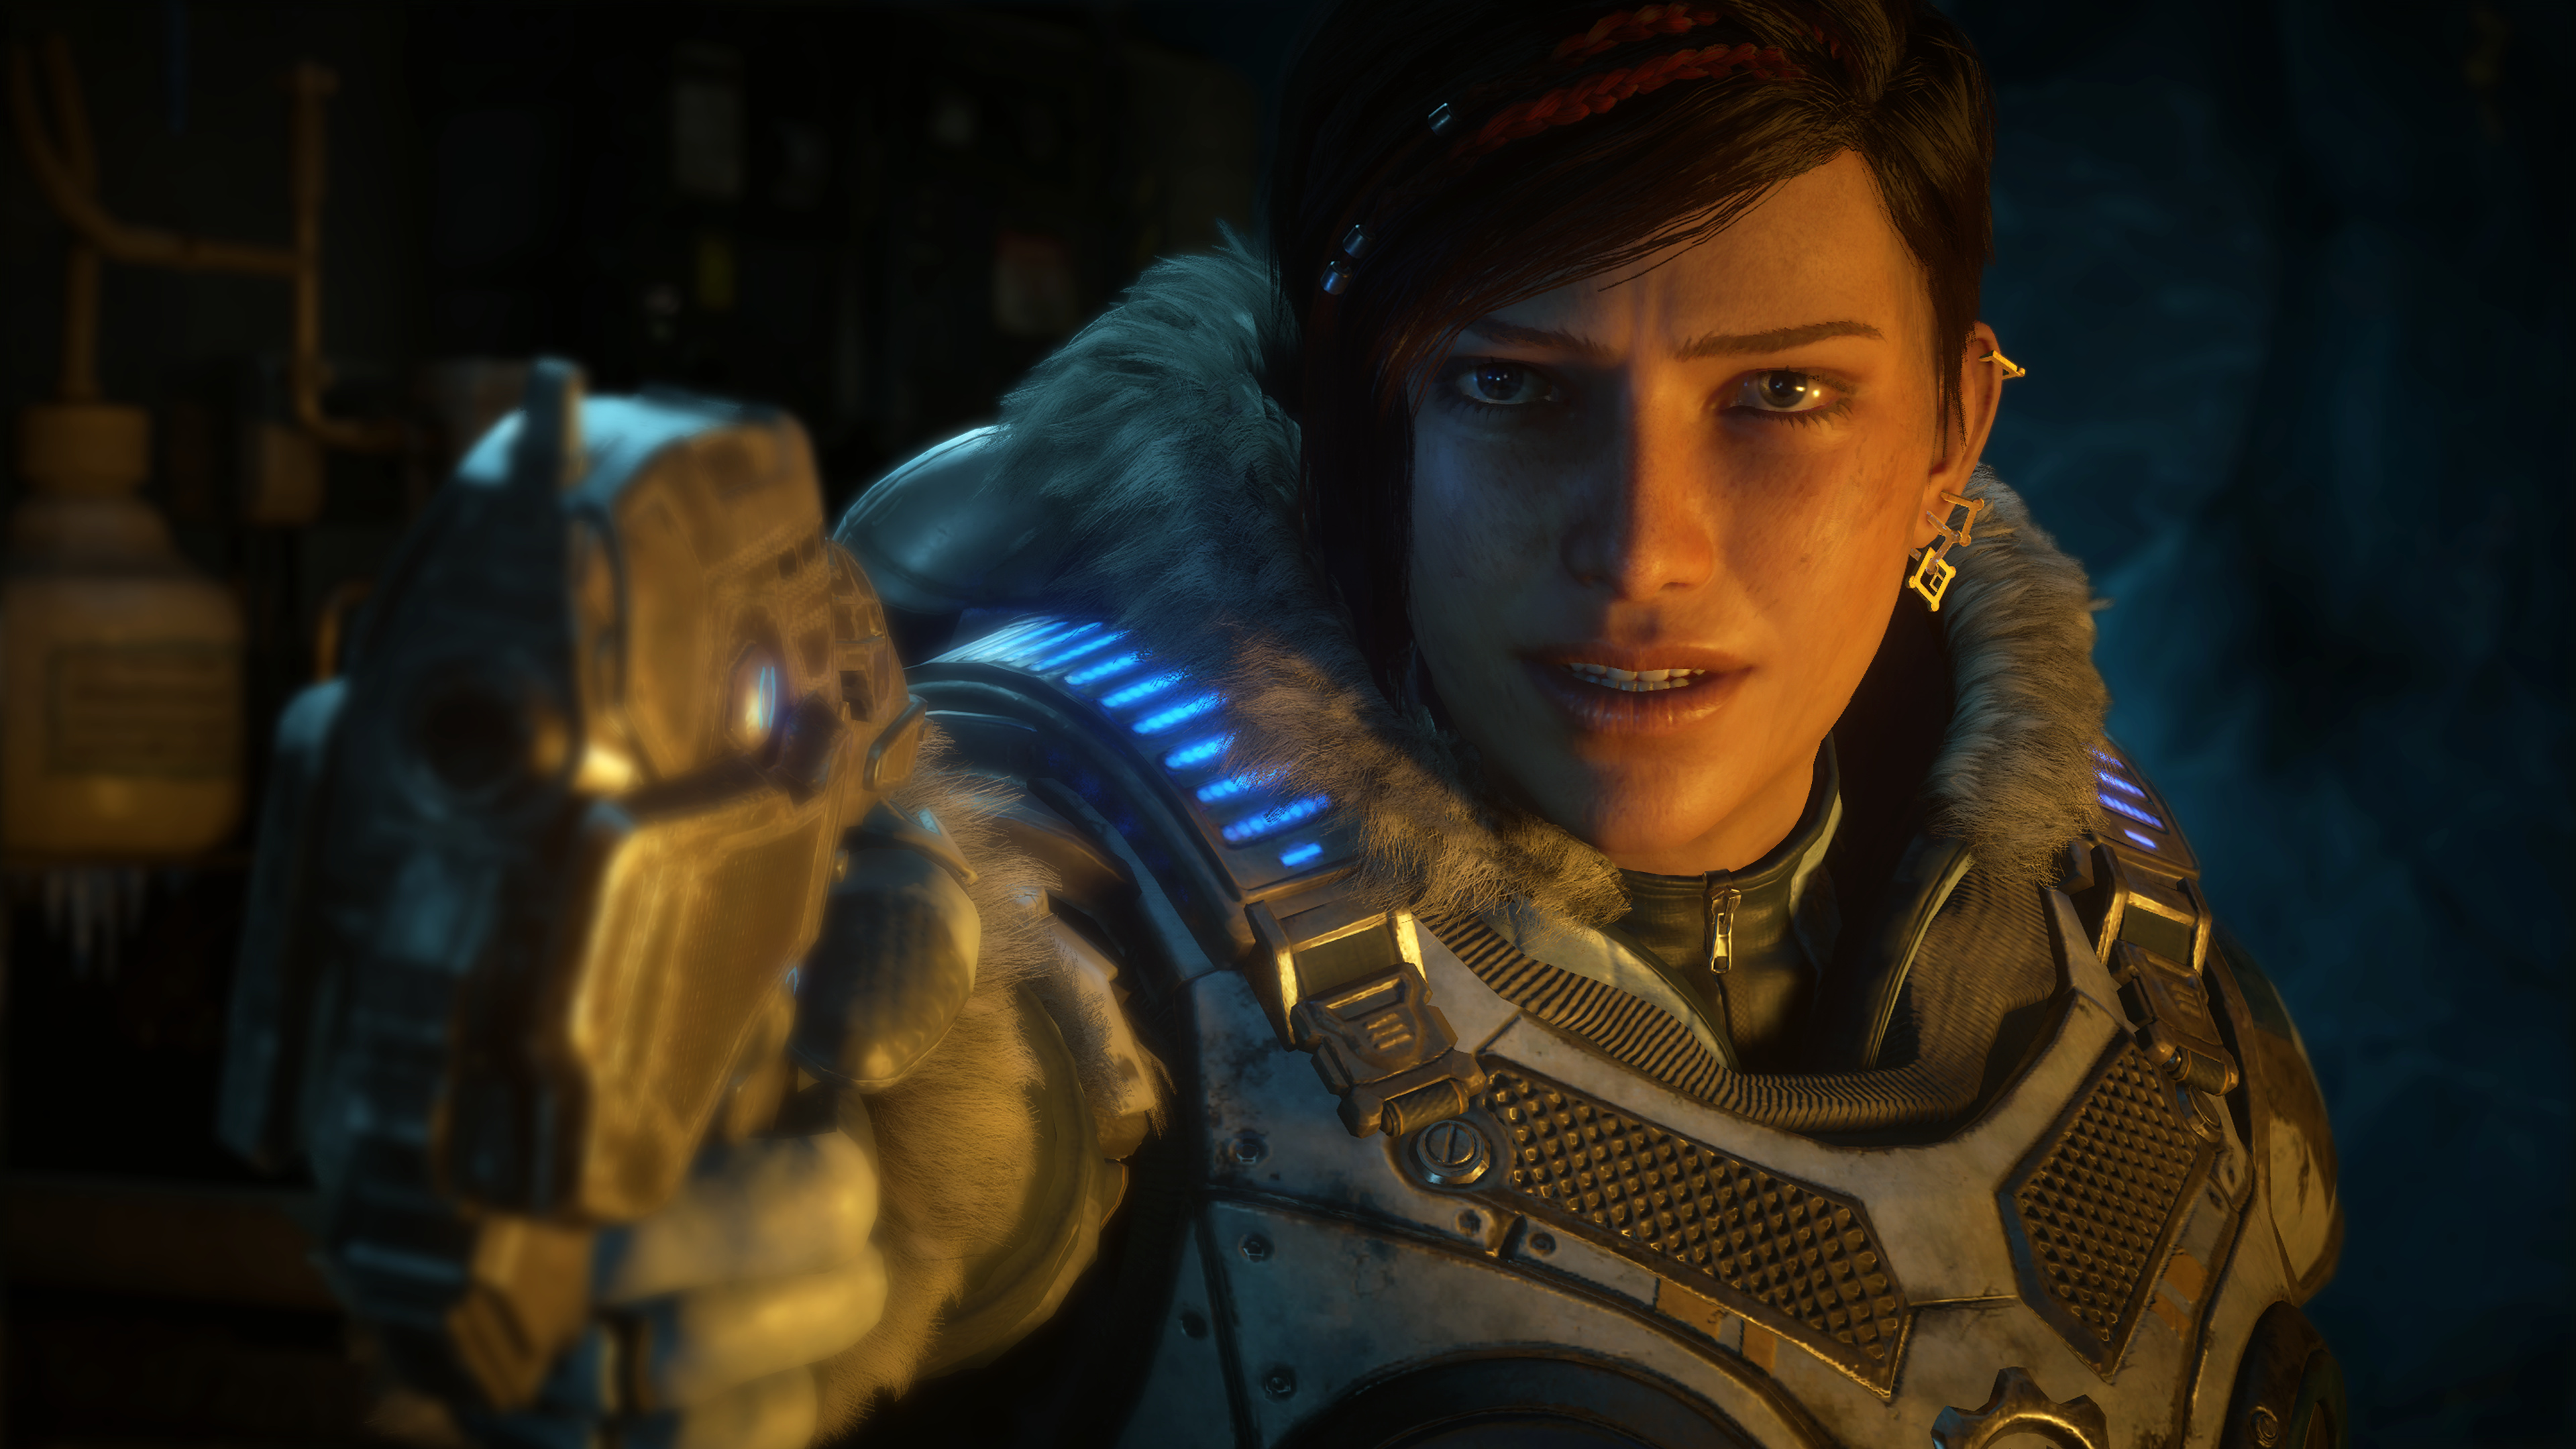 30 4K Gears 5 wallpapers, Wide variety, High-quality images, Visual diversity, 3840x2160 4K Desktop